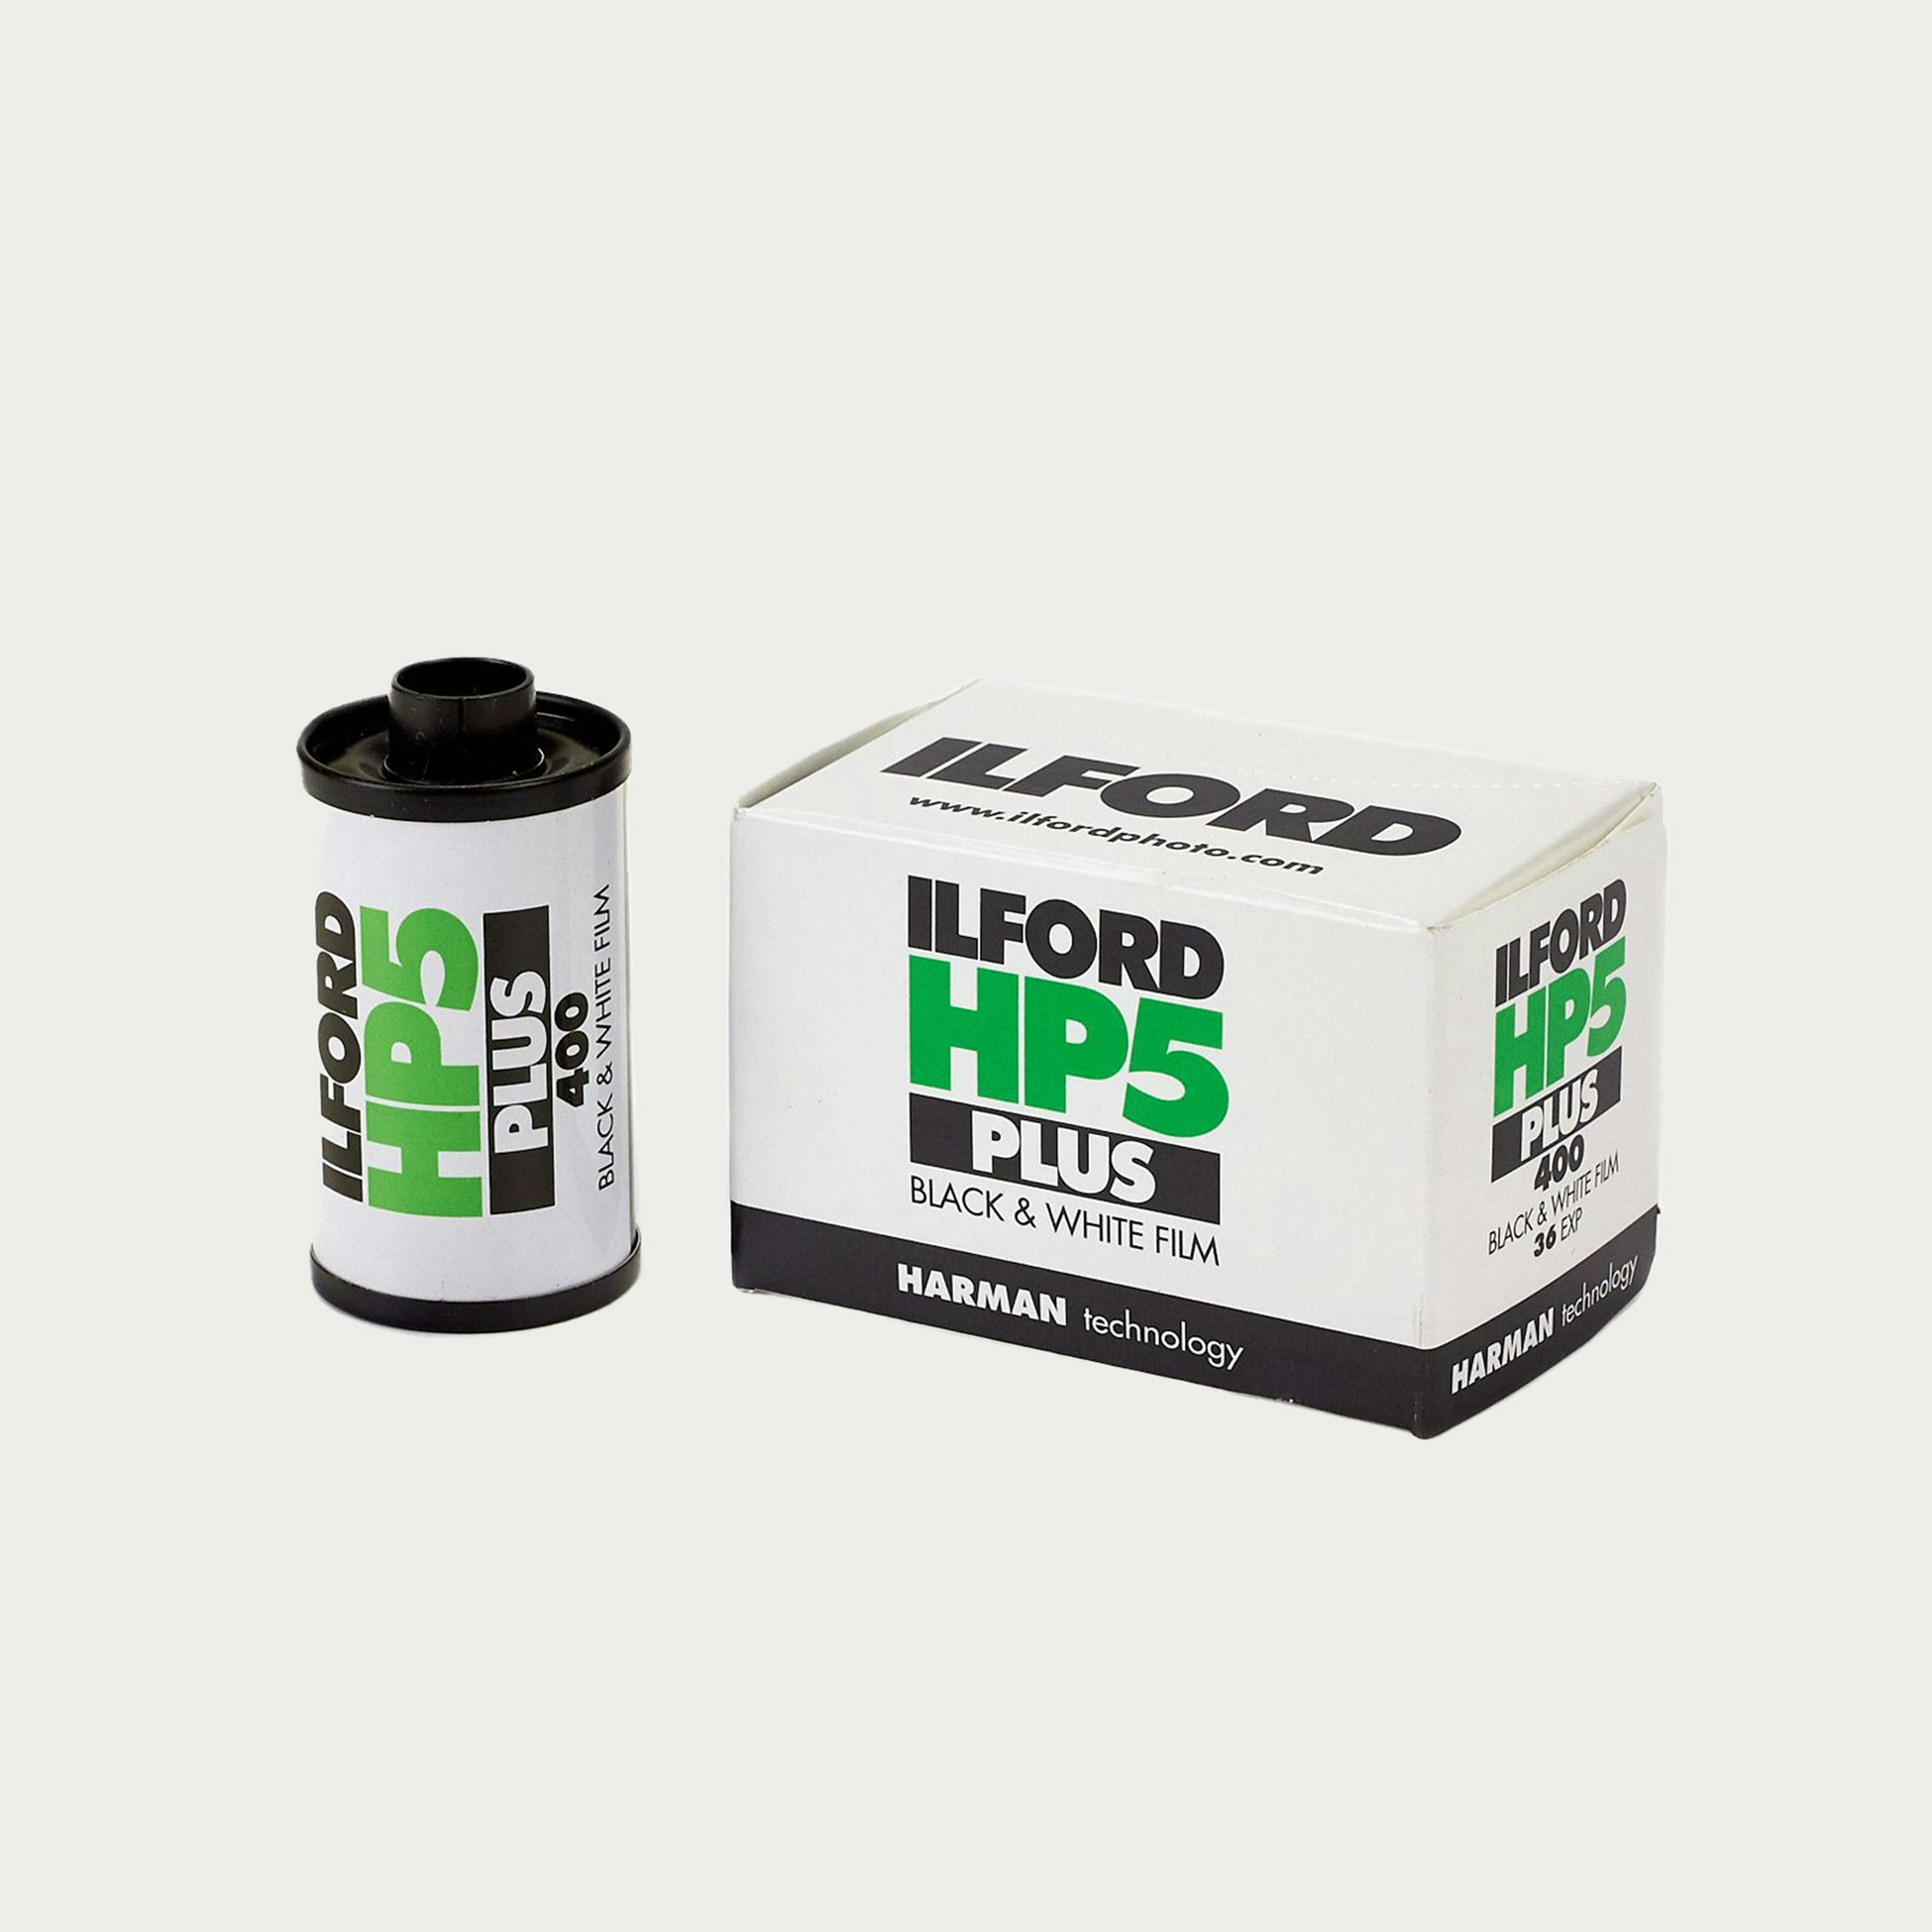 HP5 PLUS Black and White Negative 35mm Film (36 Exposures) - 36 Exp / Single Pack (1 Roll)